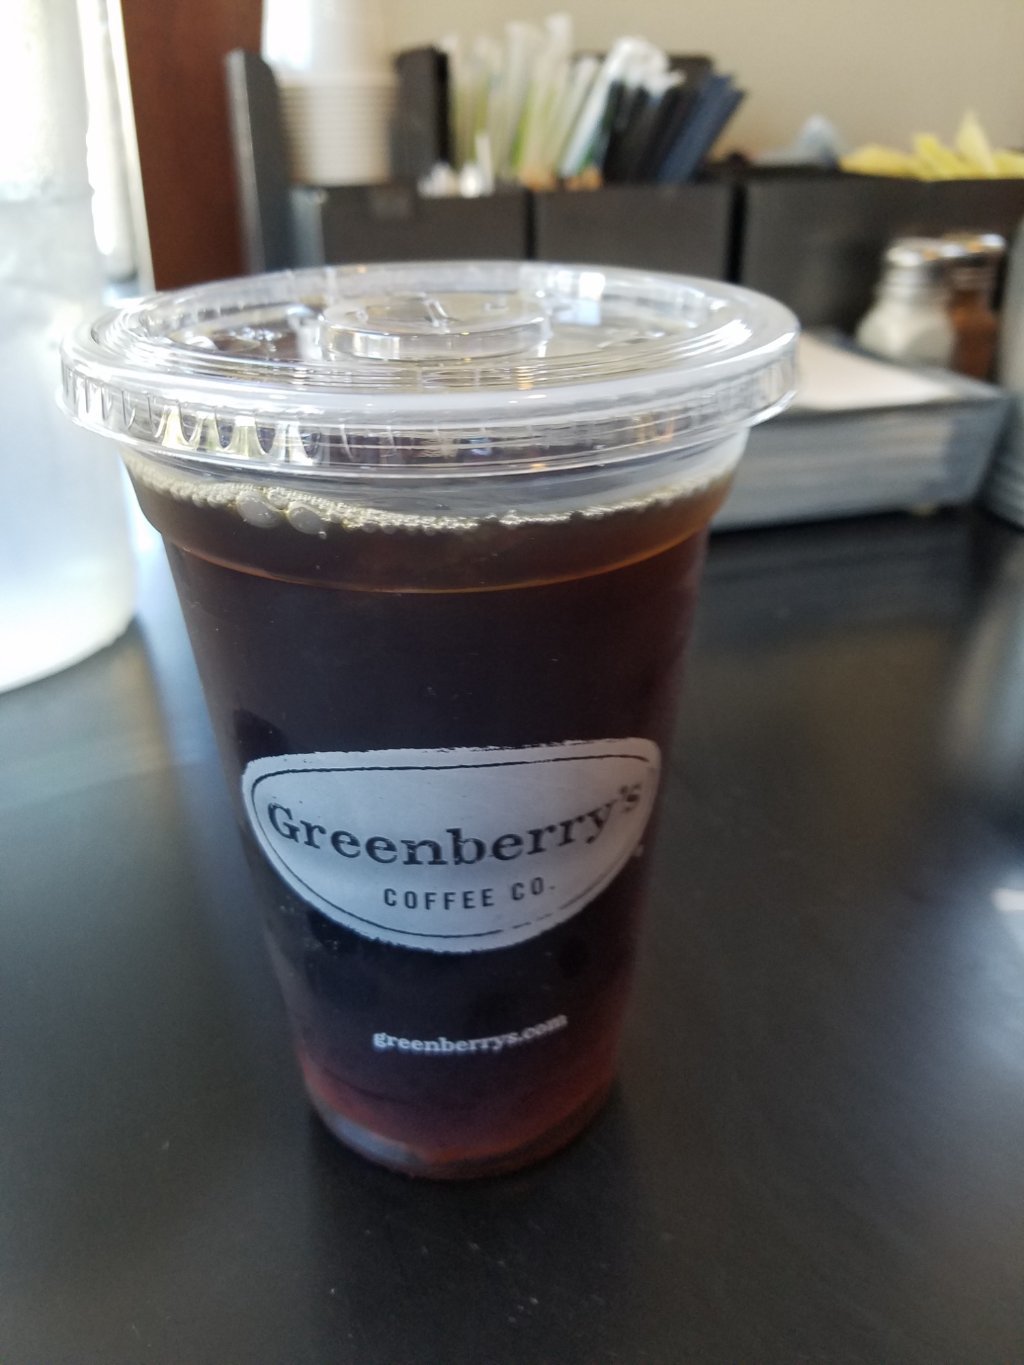 Greenberry`s Coffee Co.